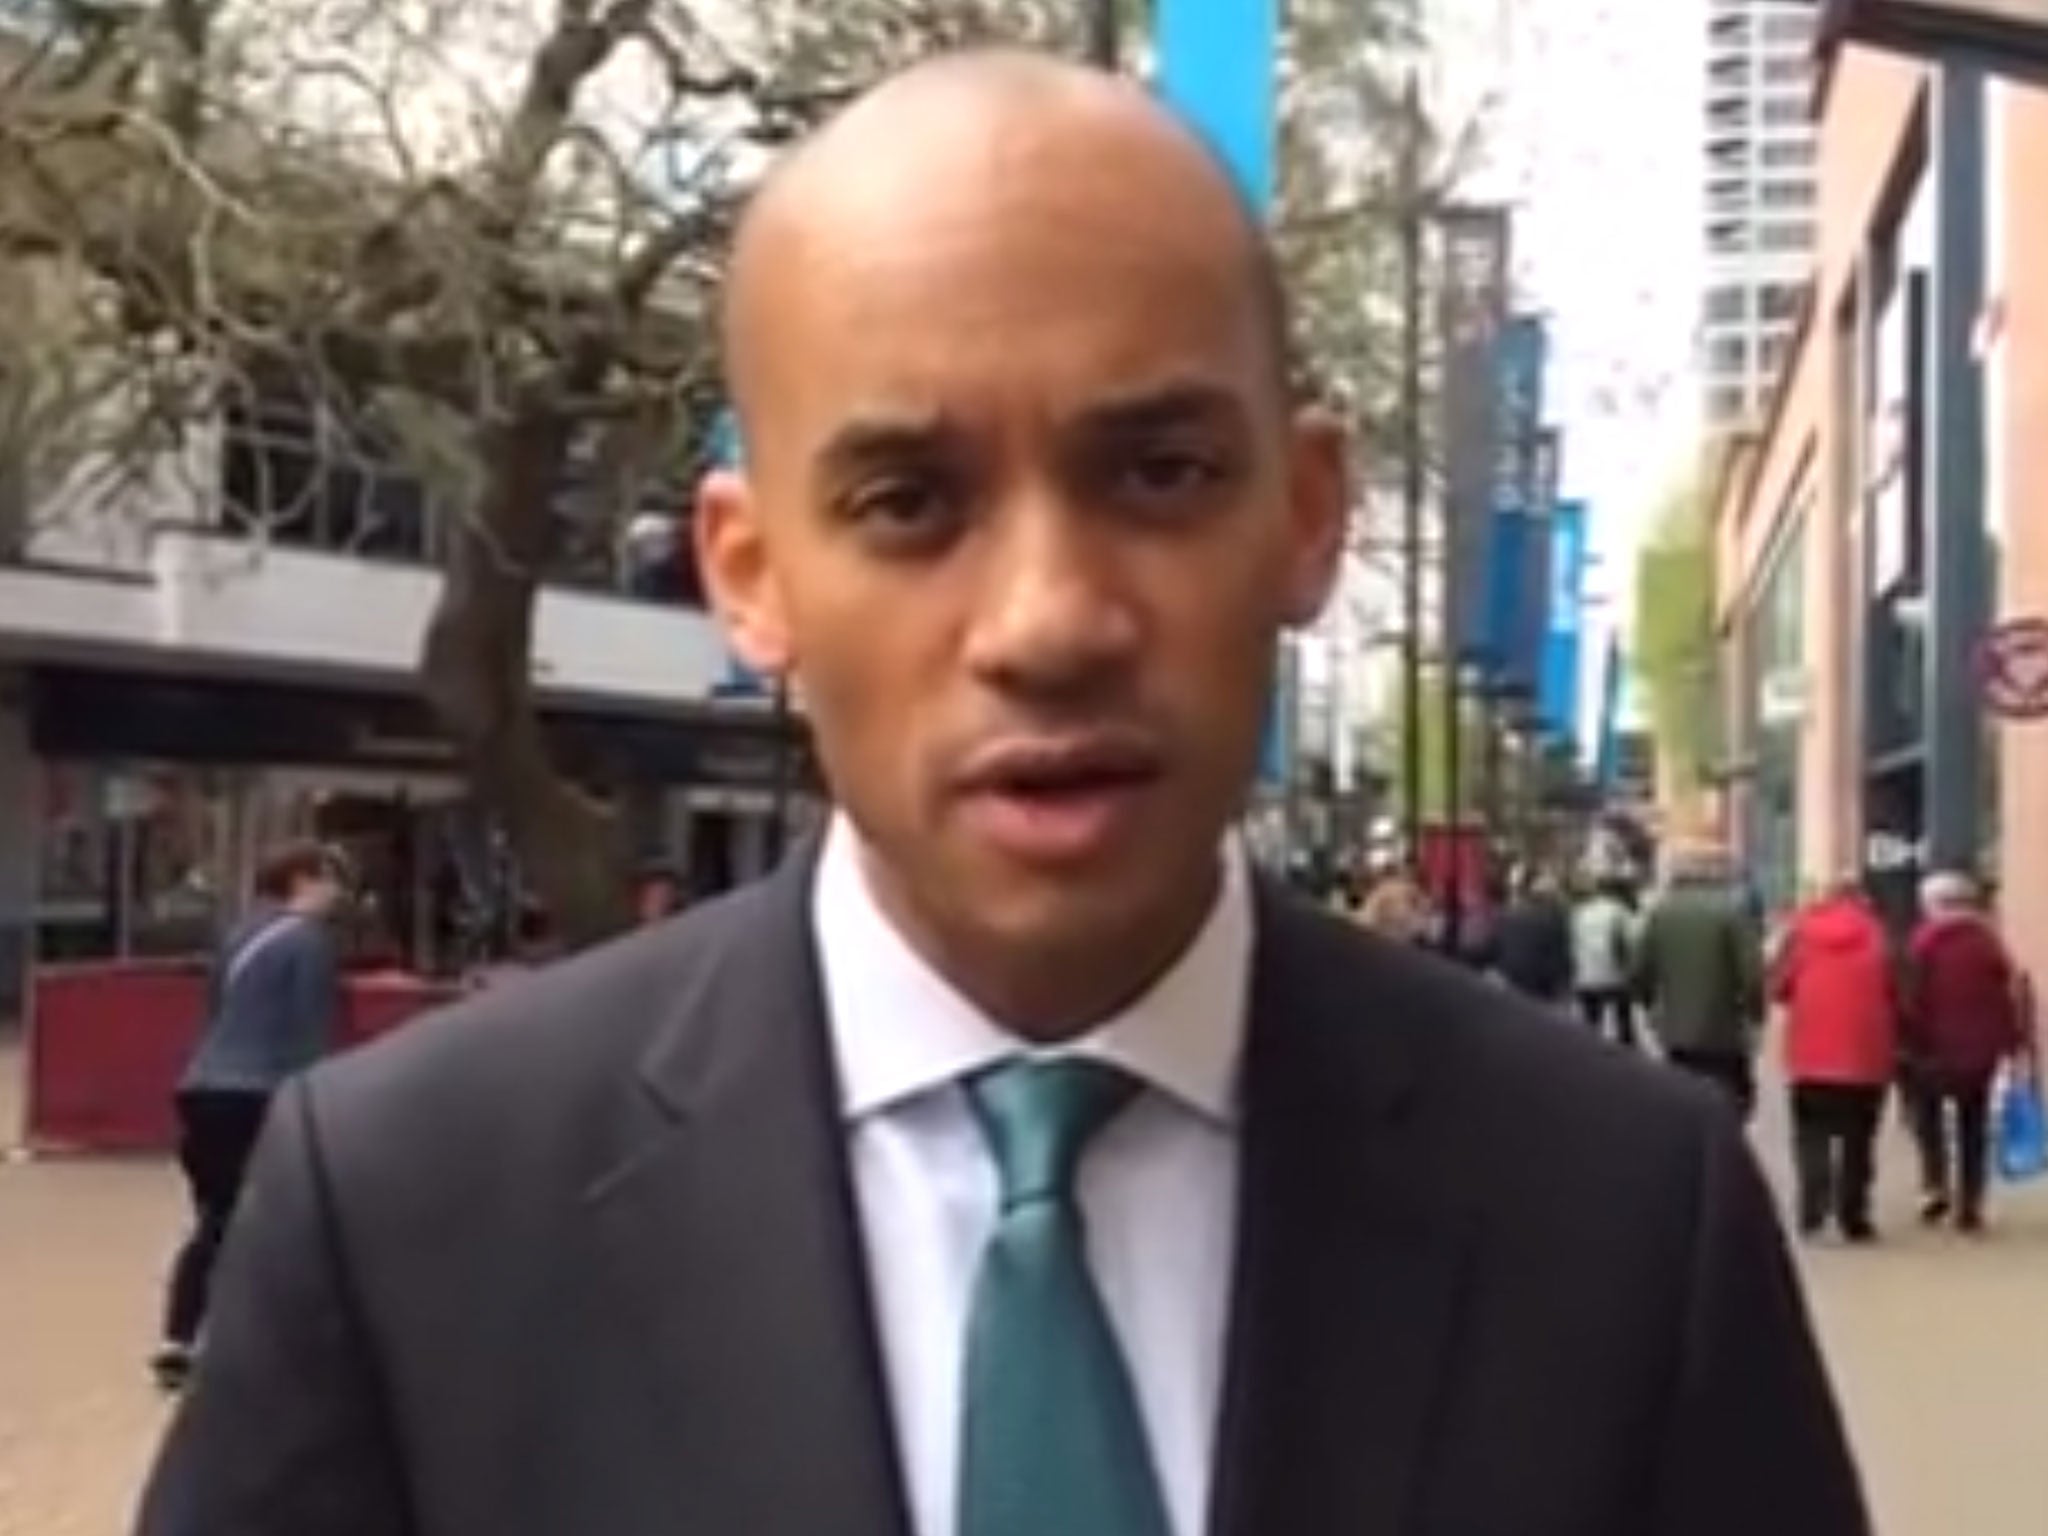 Chuka Umunna talking to himself in Swindon for his Facebook video